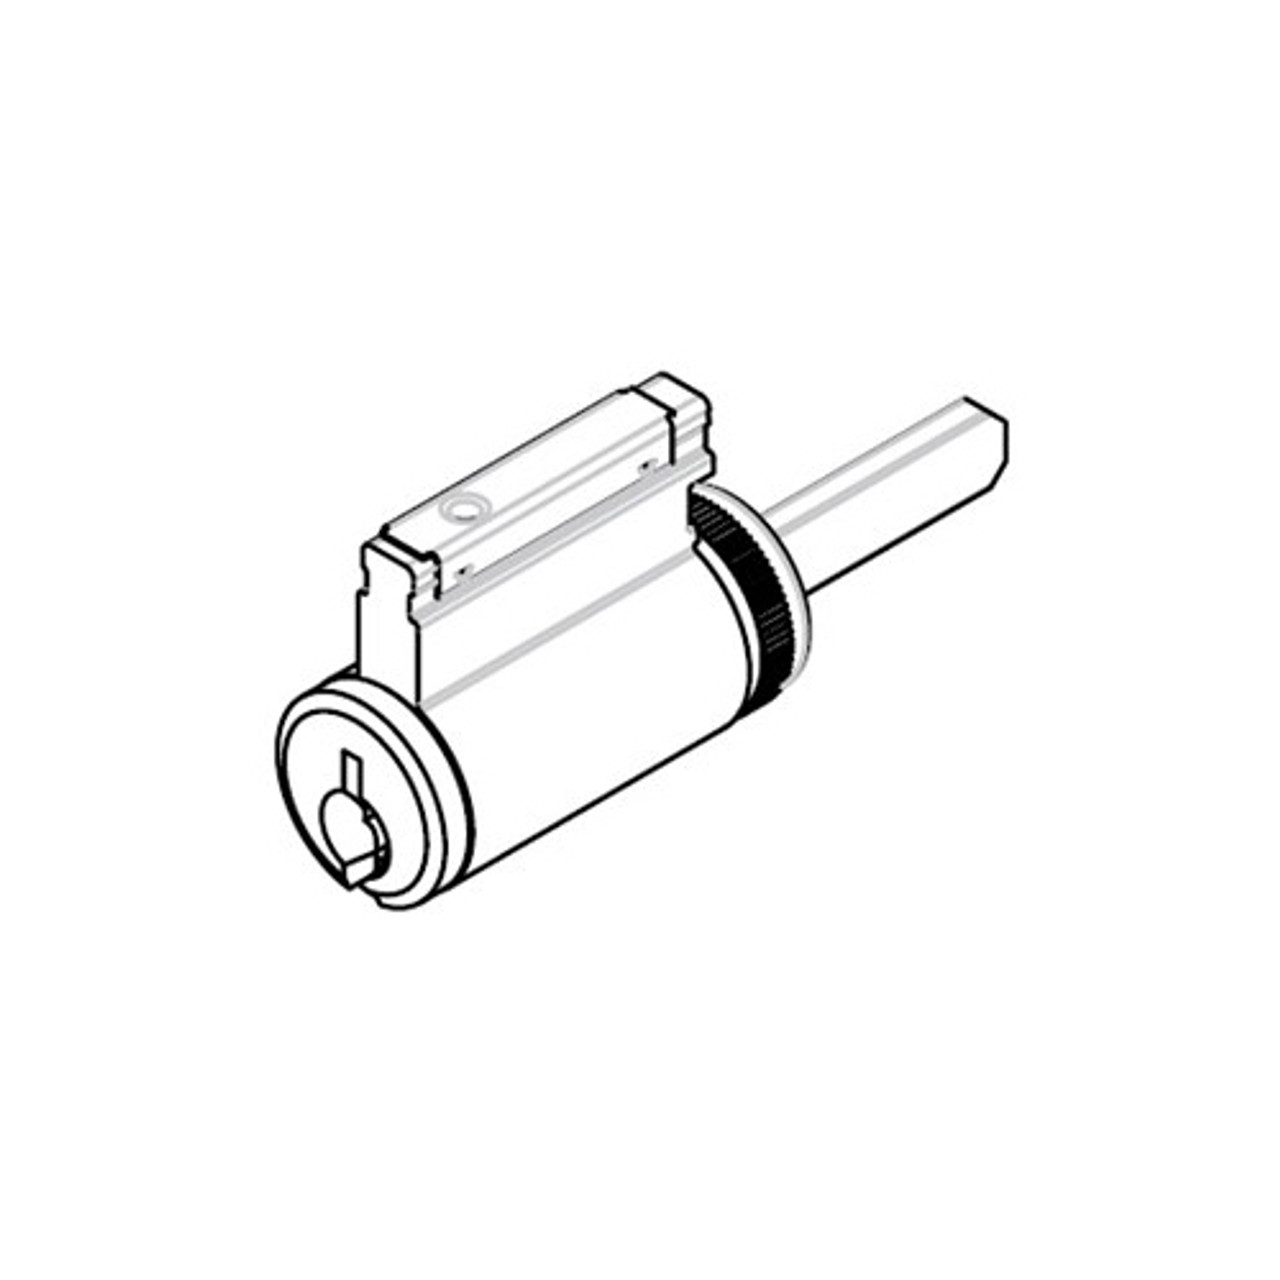 CR2000-034-N23-626 Corbin Russwin Conventional Key in Lever Cylinder in Satin Chrome